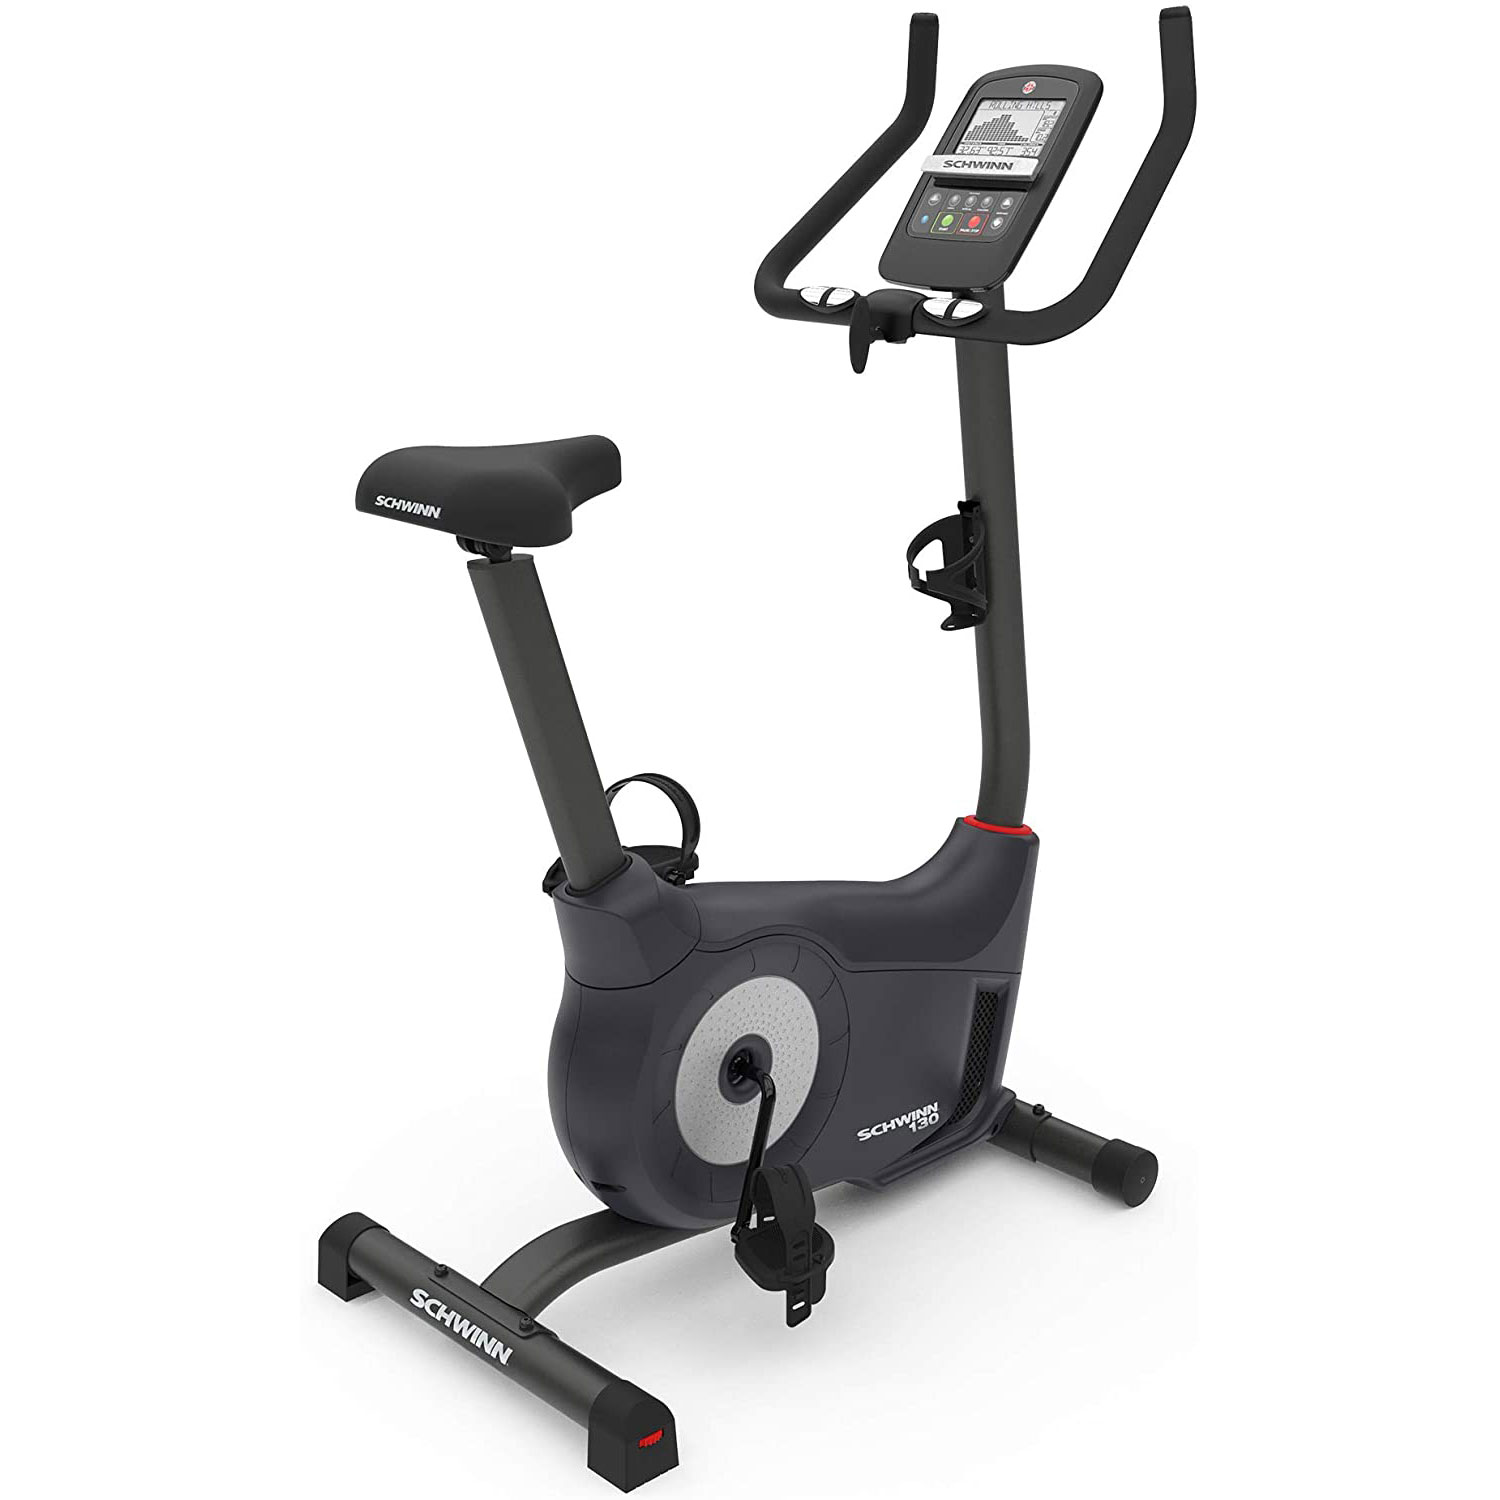 Schwinn Fitness 130 Upright Stationary Cardio Home Workout Cycling Exercise Bike - image 1 of 9